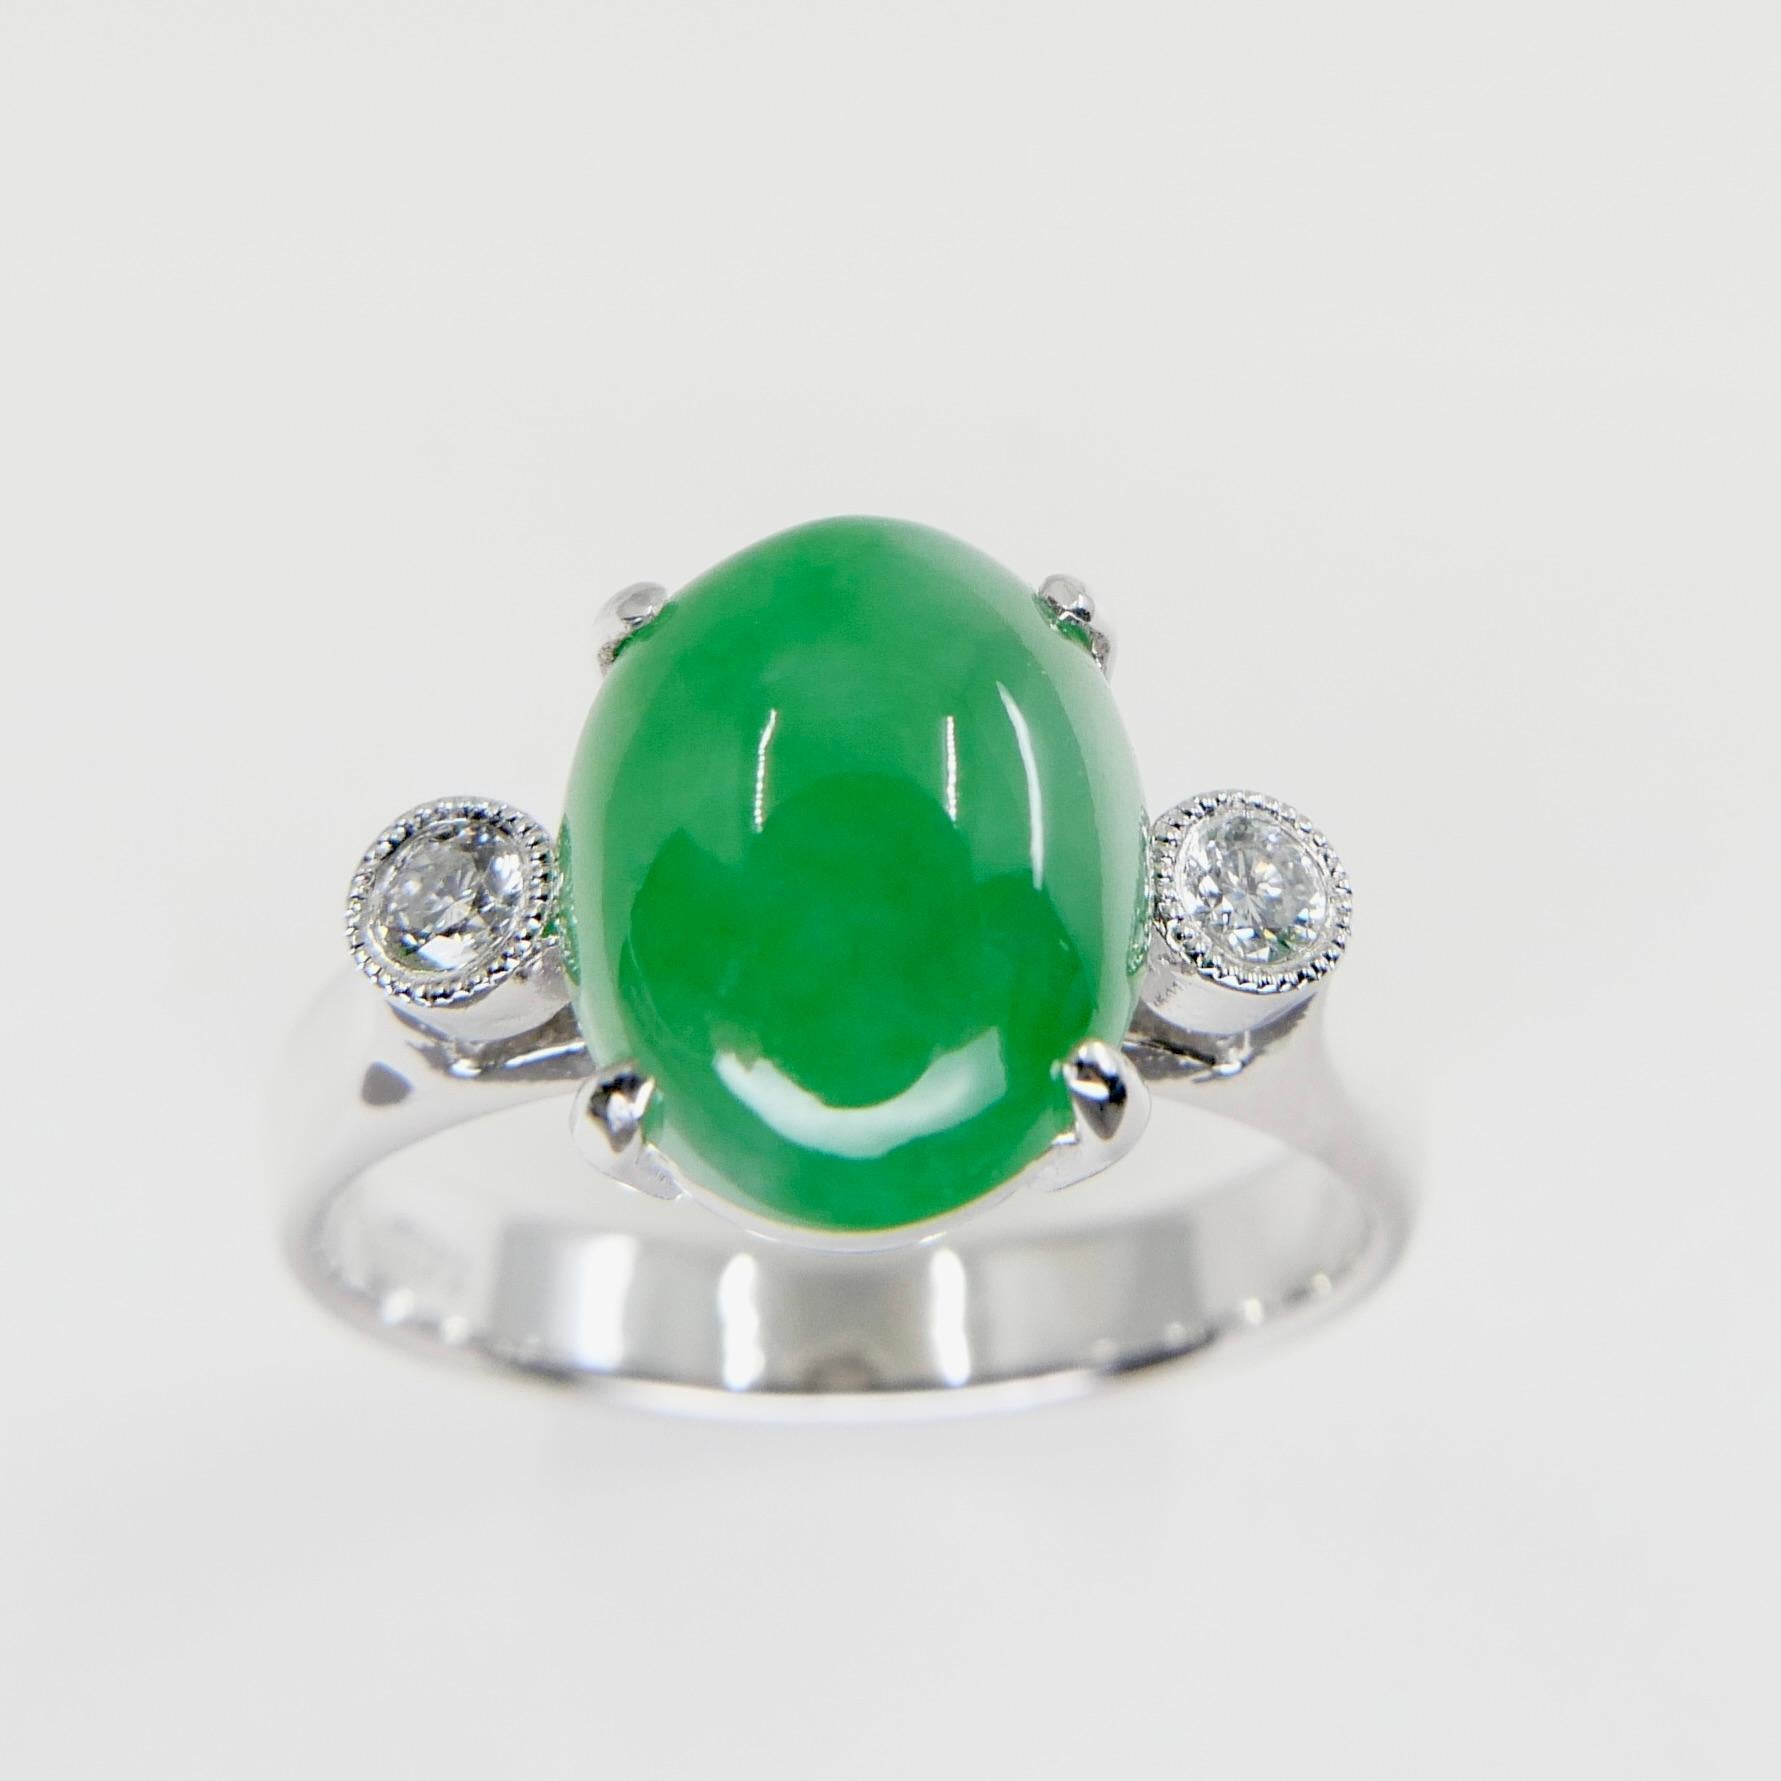 Certified Type a Jade & Oval Diamond 3 Stone Ring, Glowing Apple Green Color For Sale 8